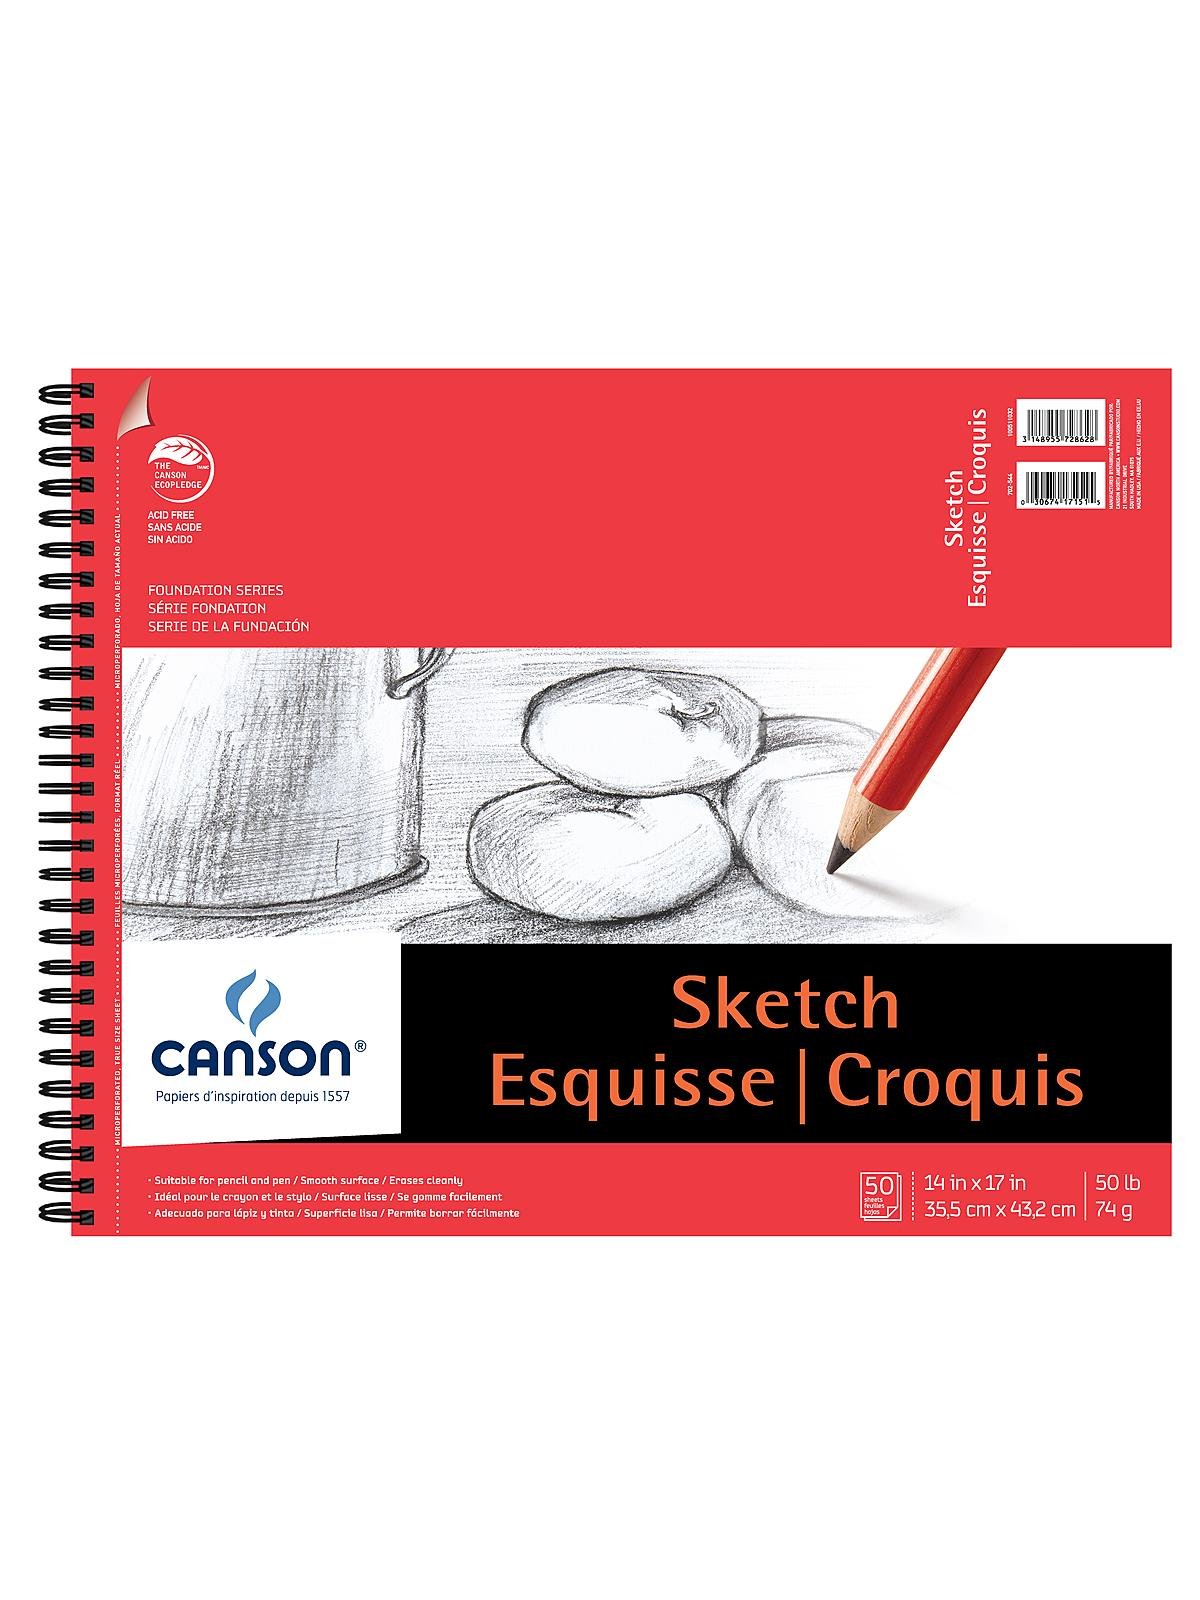 Canson Foundation Sketch Pads